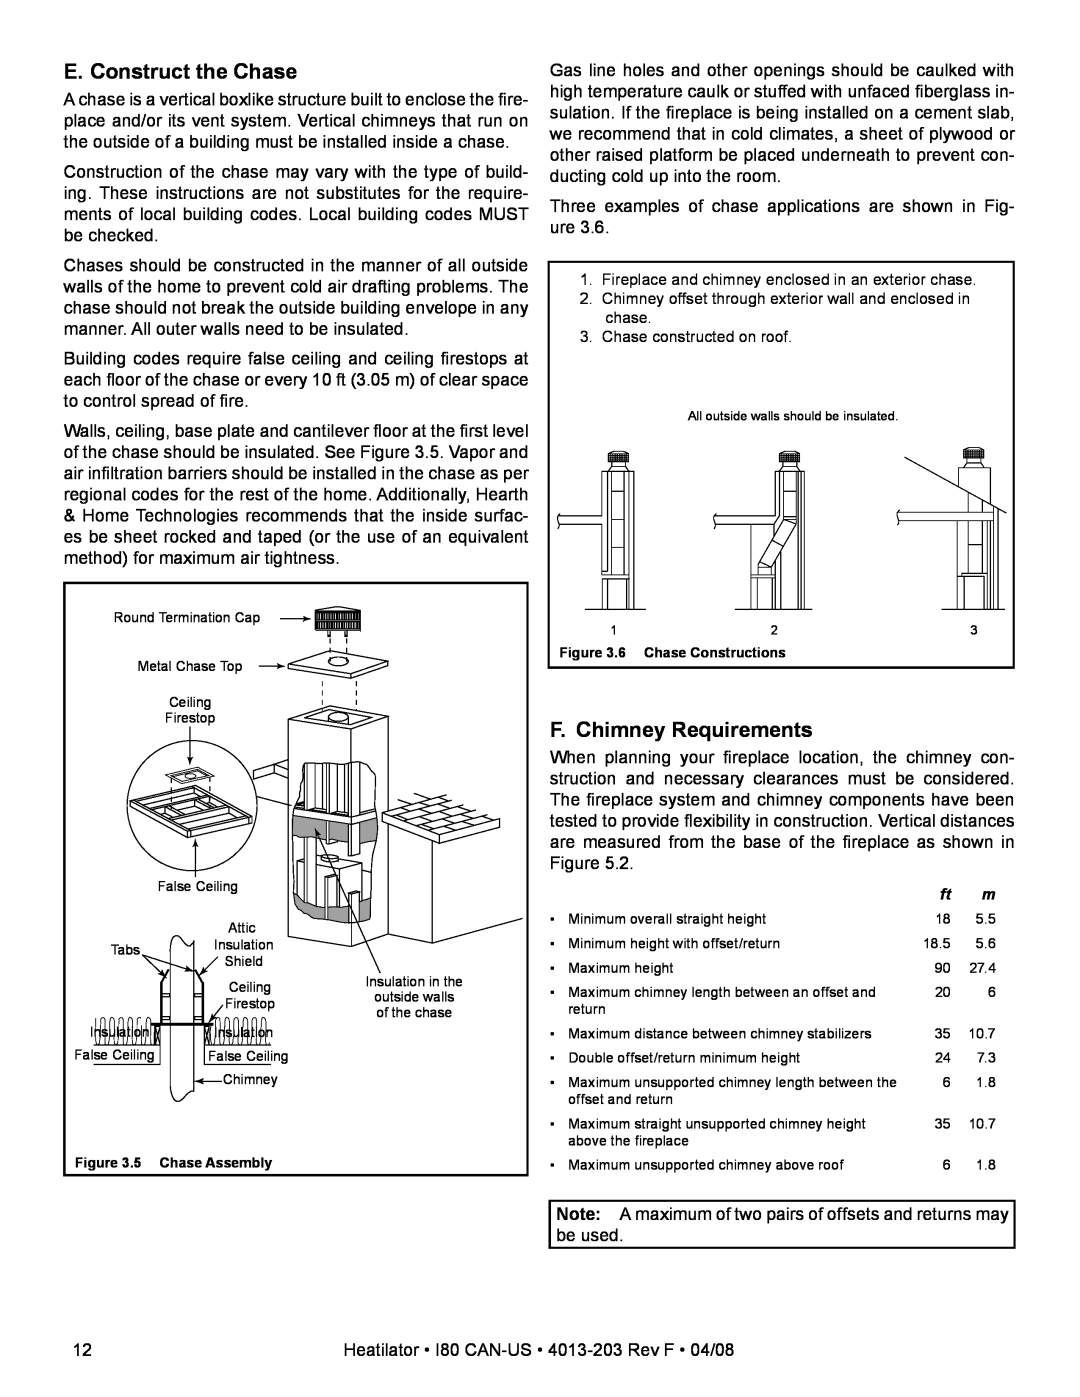 Heatiator I80 owner manual E. Construct the Chase, F. Chimney Requirements 